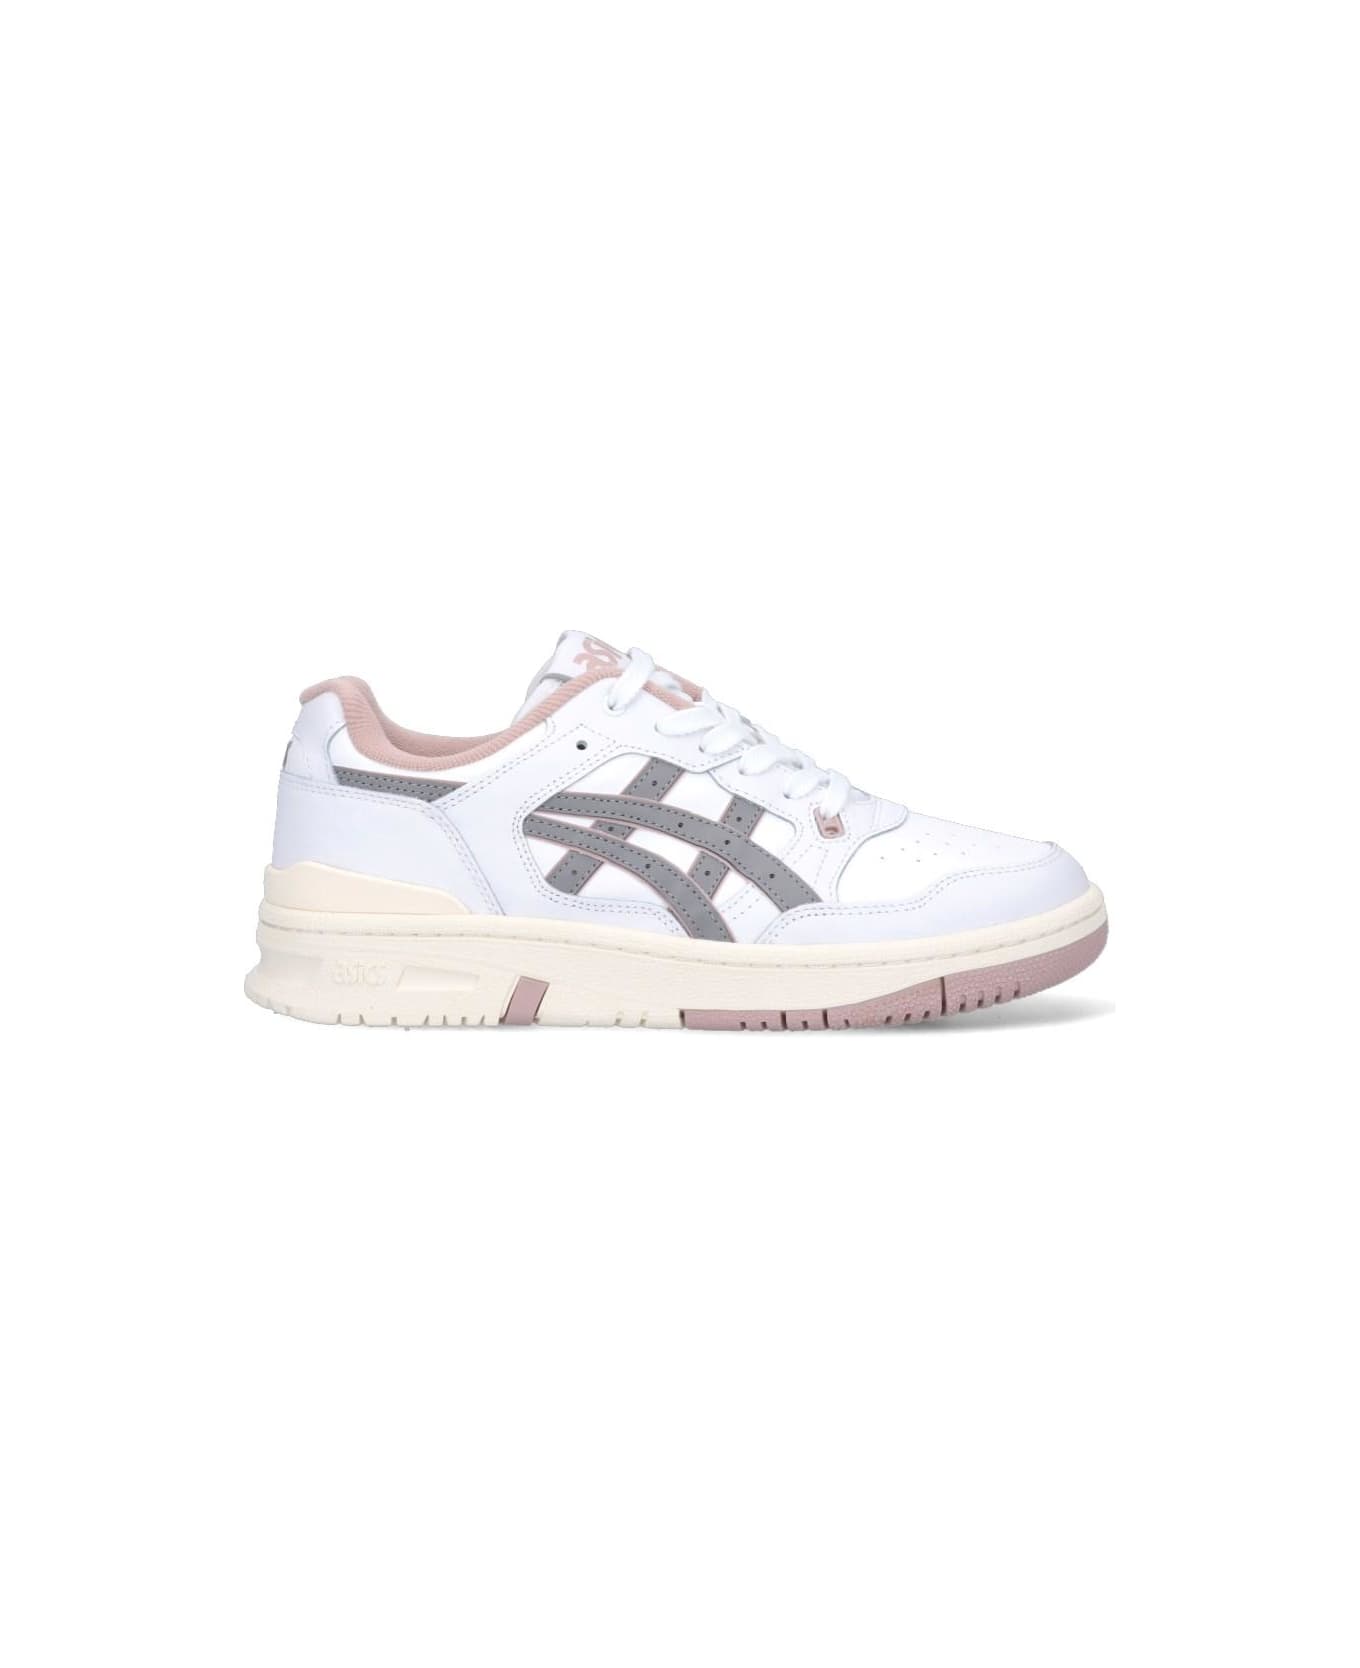 Asics Ex89 Sneakers - White/clay Grey